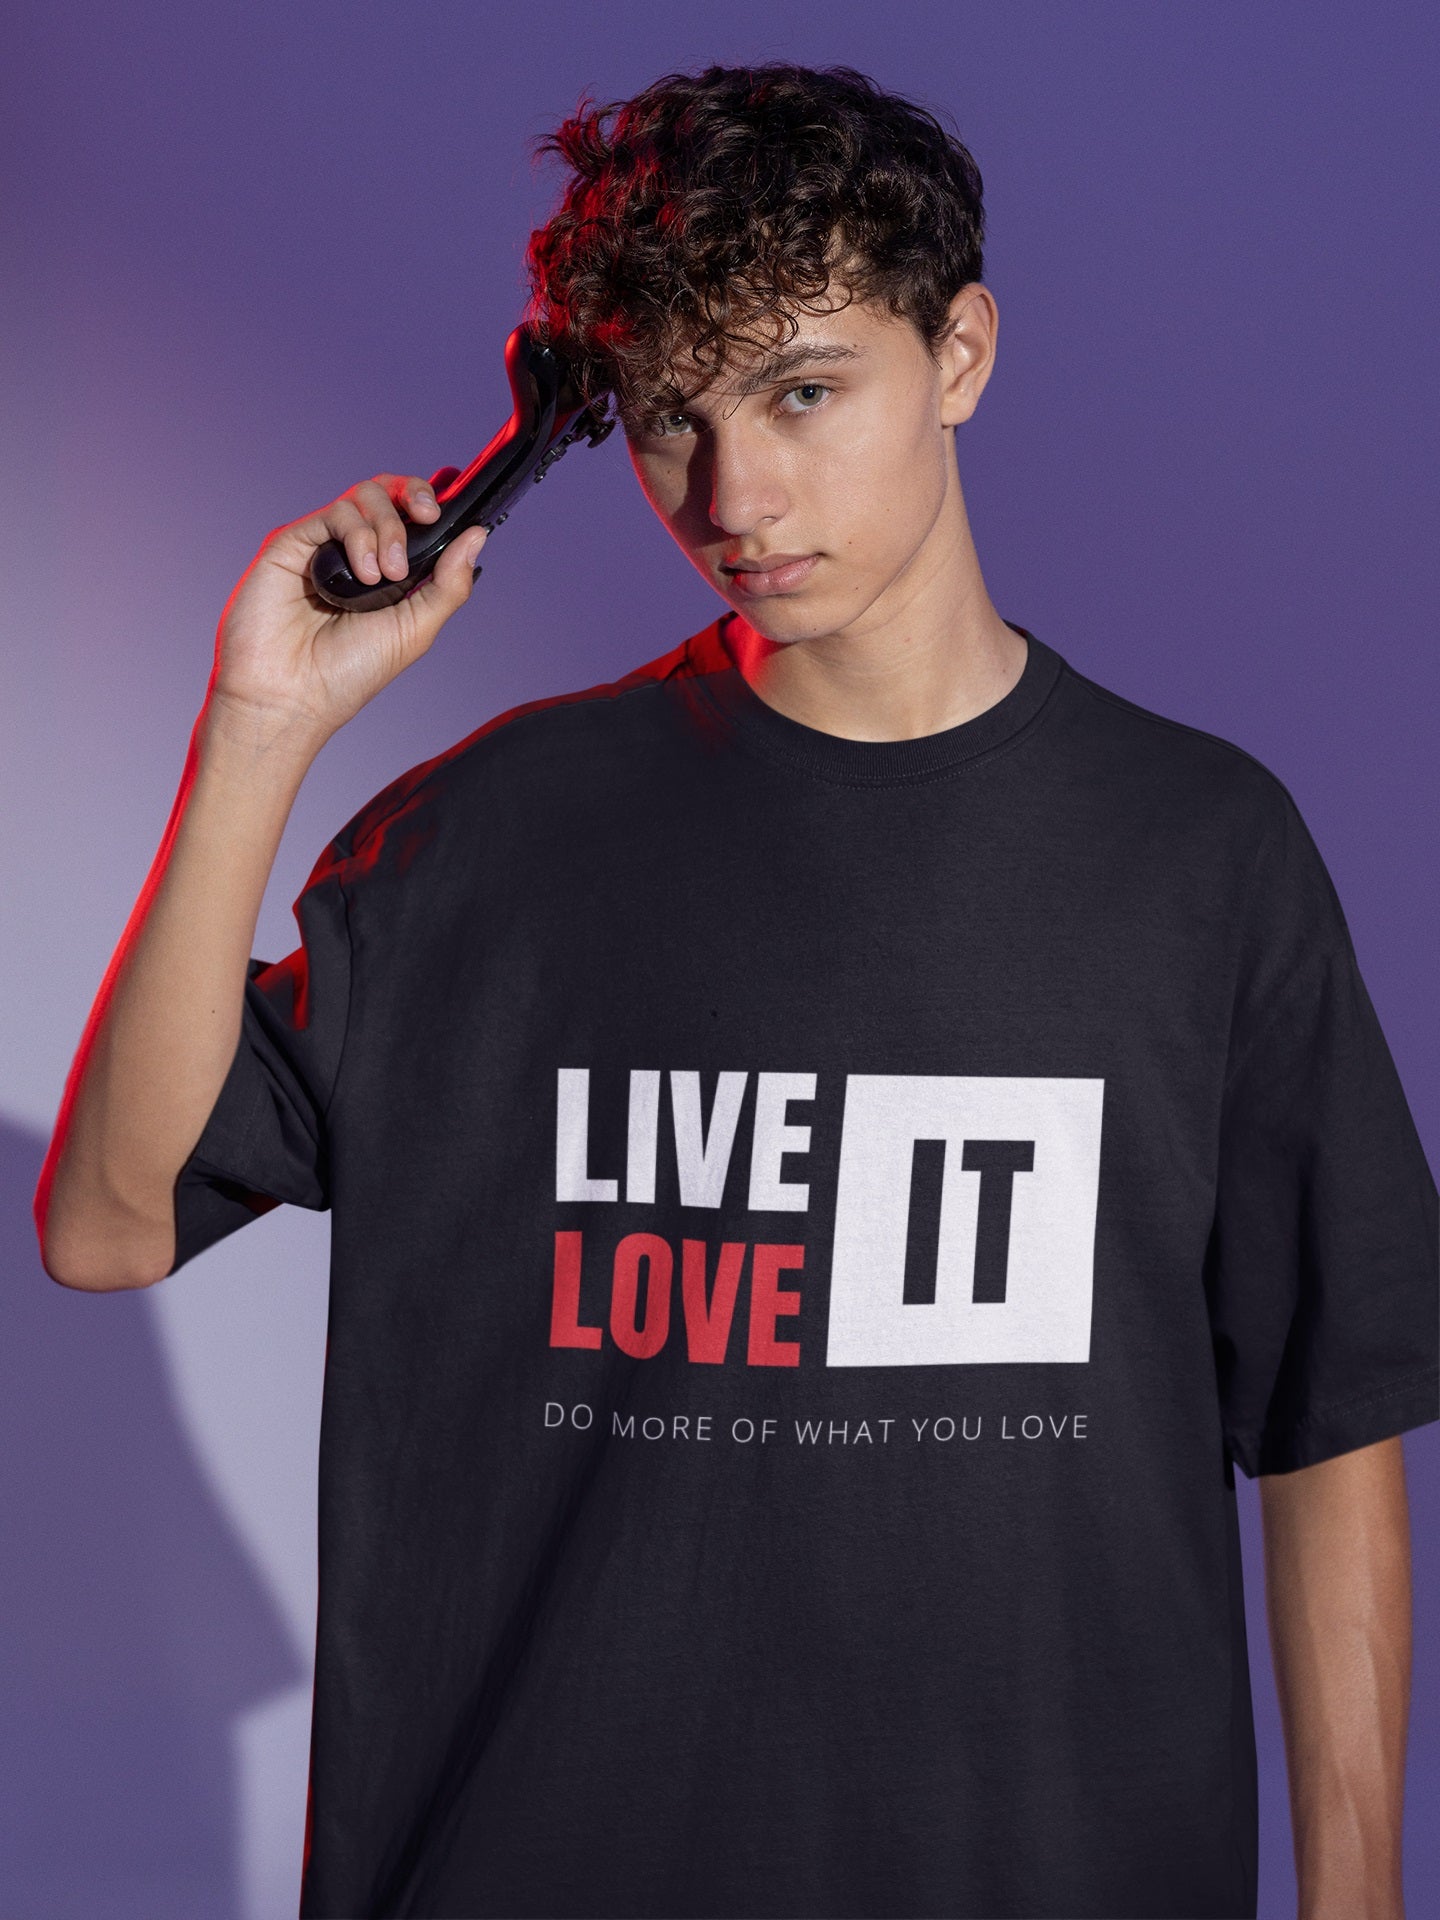 Expanse Premium Quality Oversized T-Shirt Crafted with 100% Combed Cotton for For Teen, Boys, Girls Men & Women - Live it